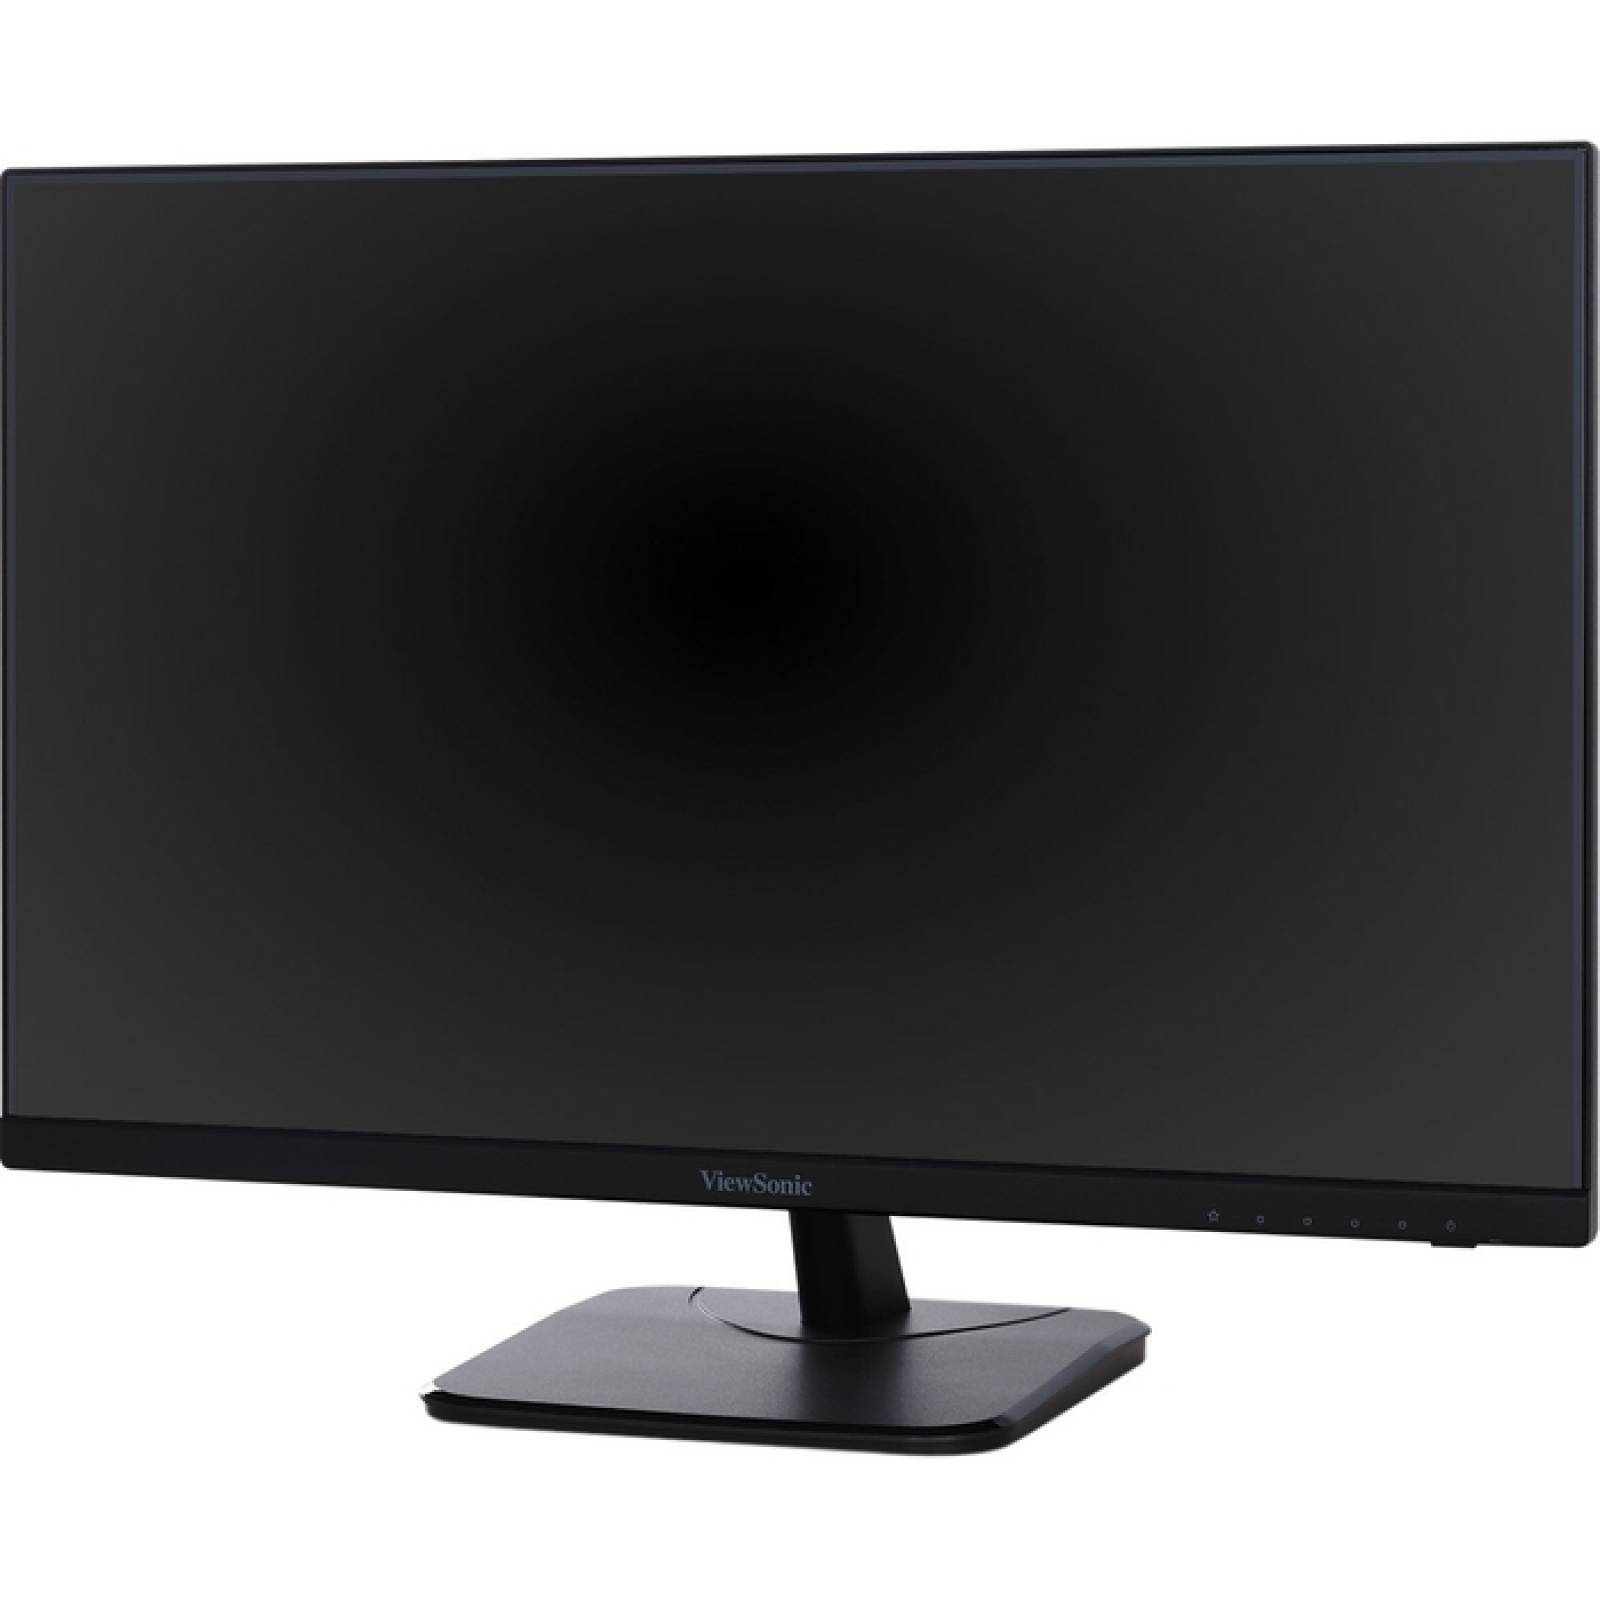 22IN SUPERCLEAR IPS FULL HD  MONITOR CON DISEO SIN MARCO 1080P